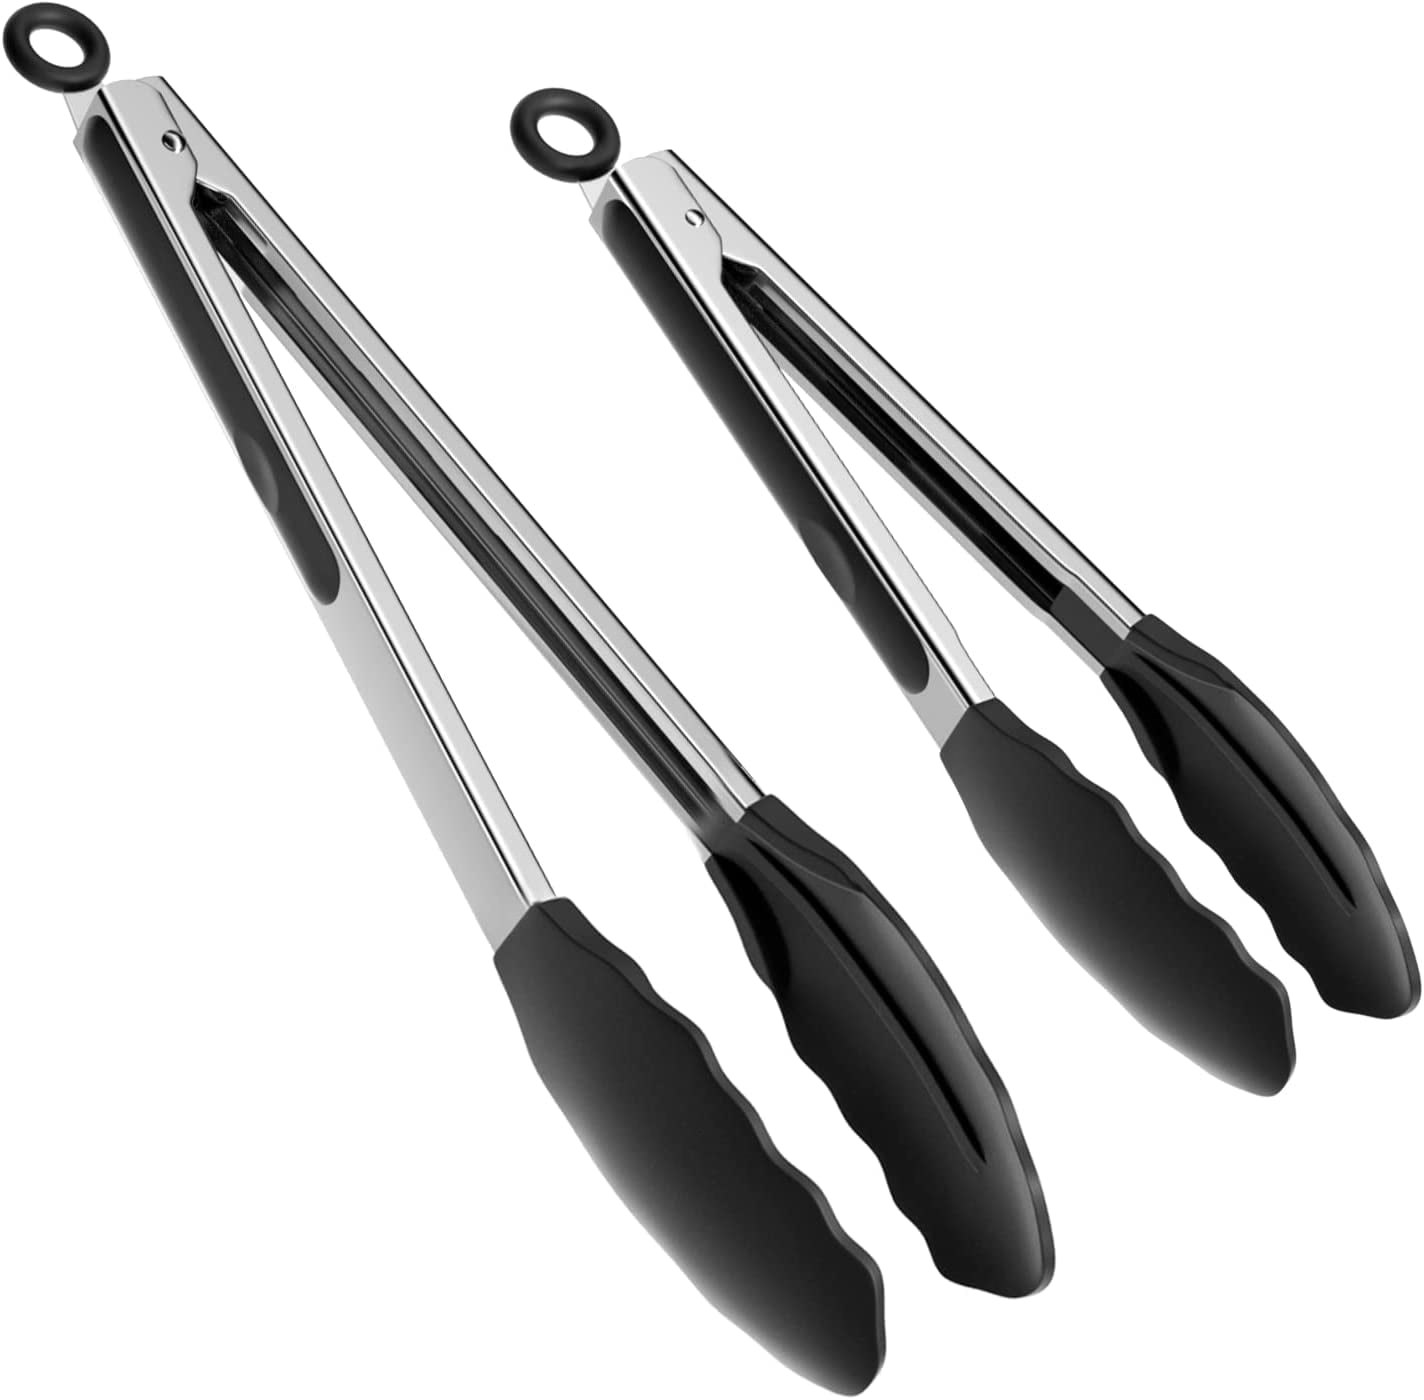 Choice 16 Silicone Tip Locking Tongs with Black Non-Slip Grip Handle